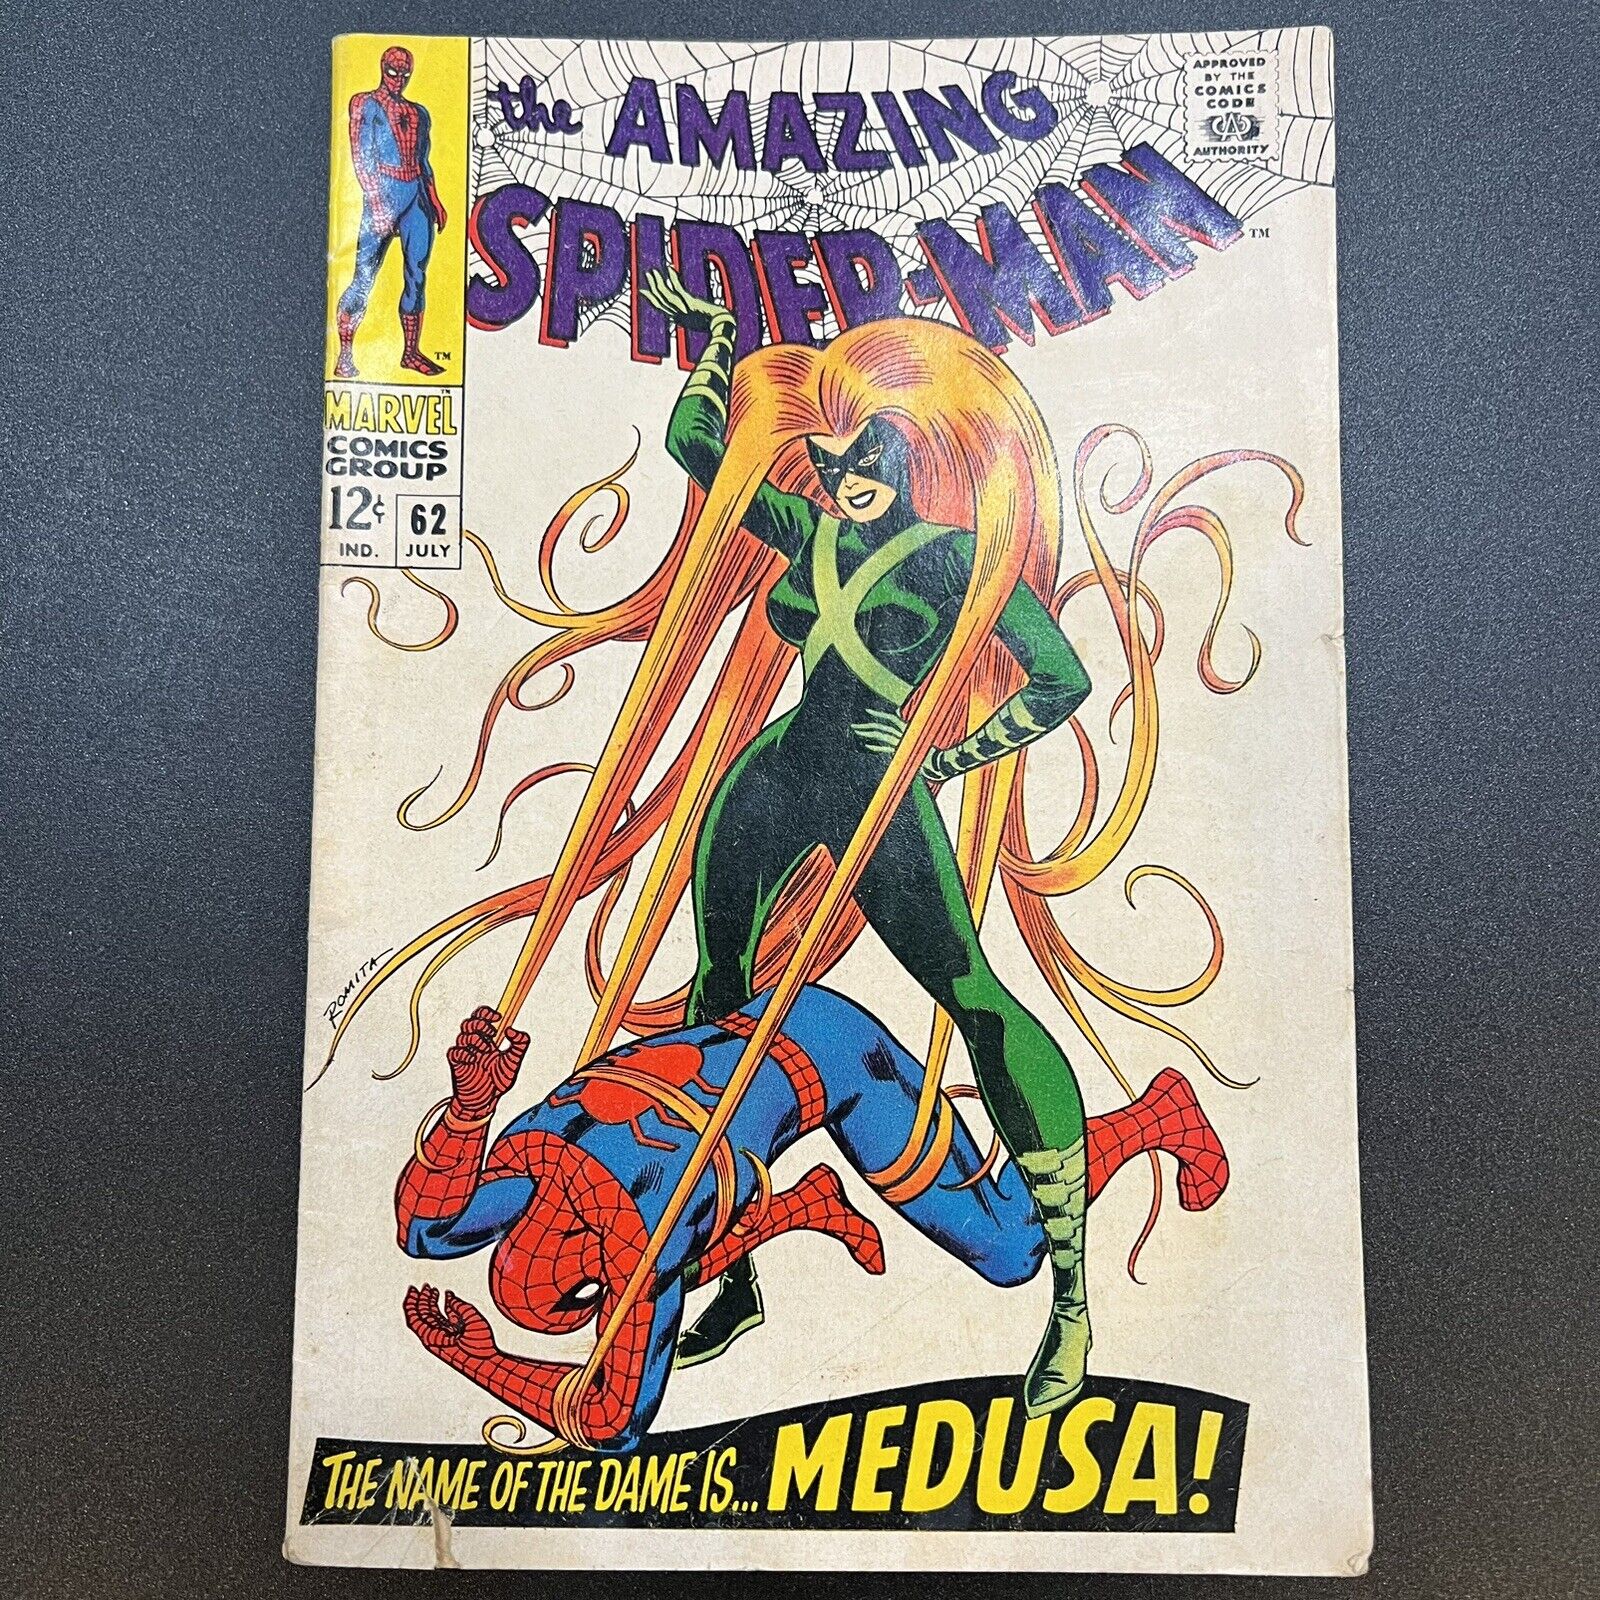 THE AMAZING SPIDER-MAN #62 MEDUSA COVER SILVER AGE MARVEL COMICS 1968